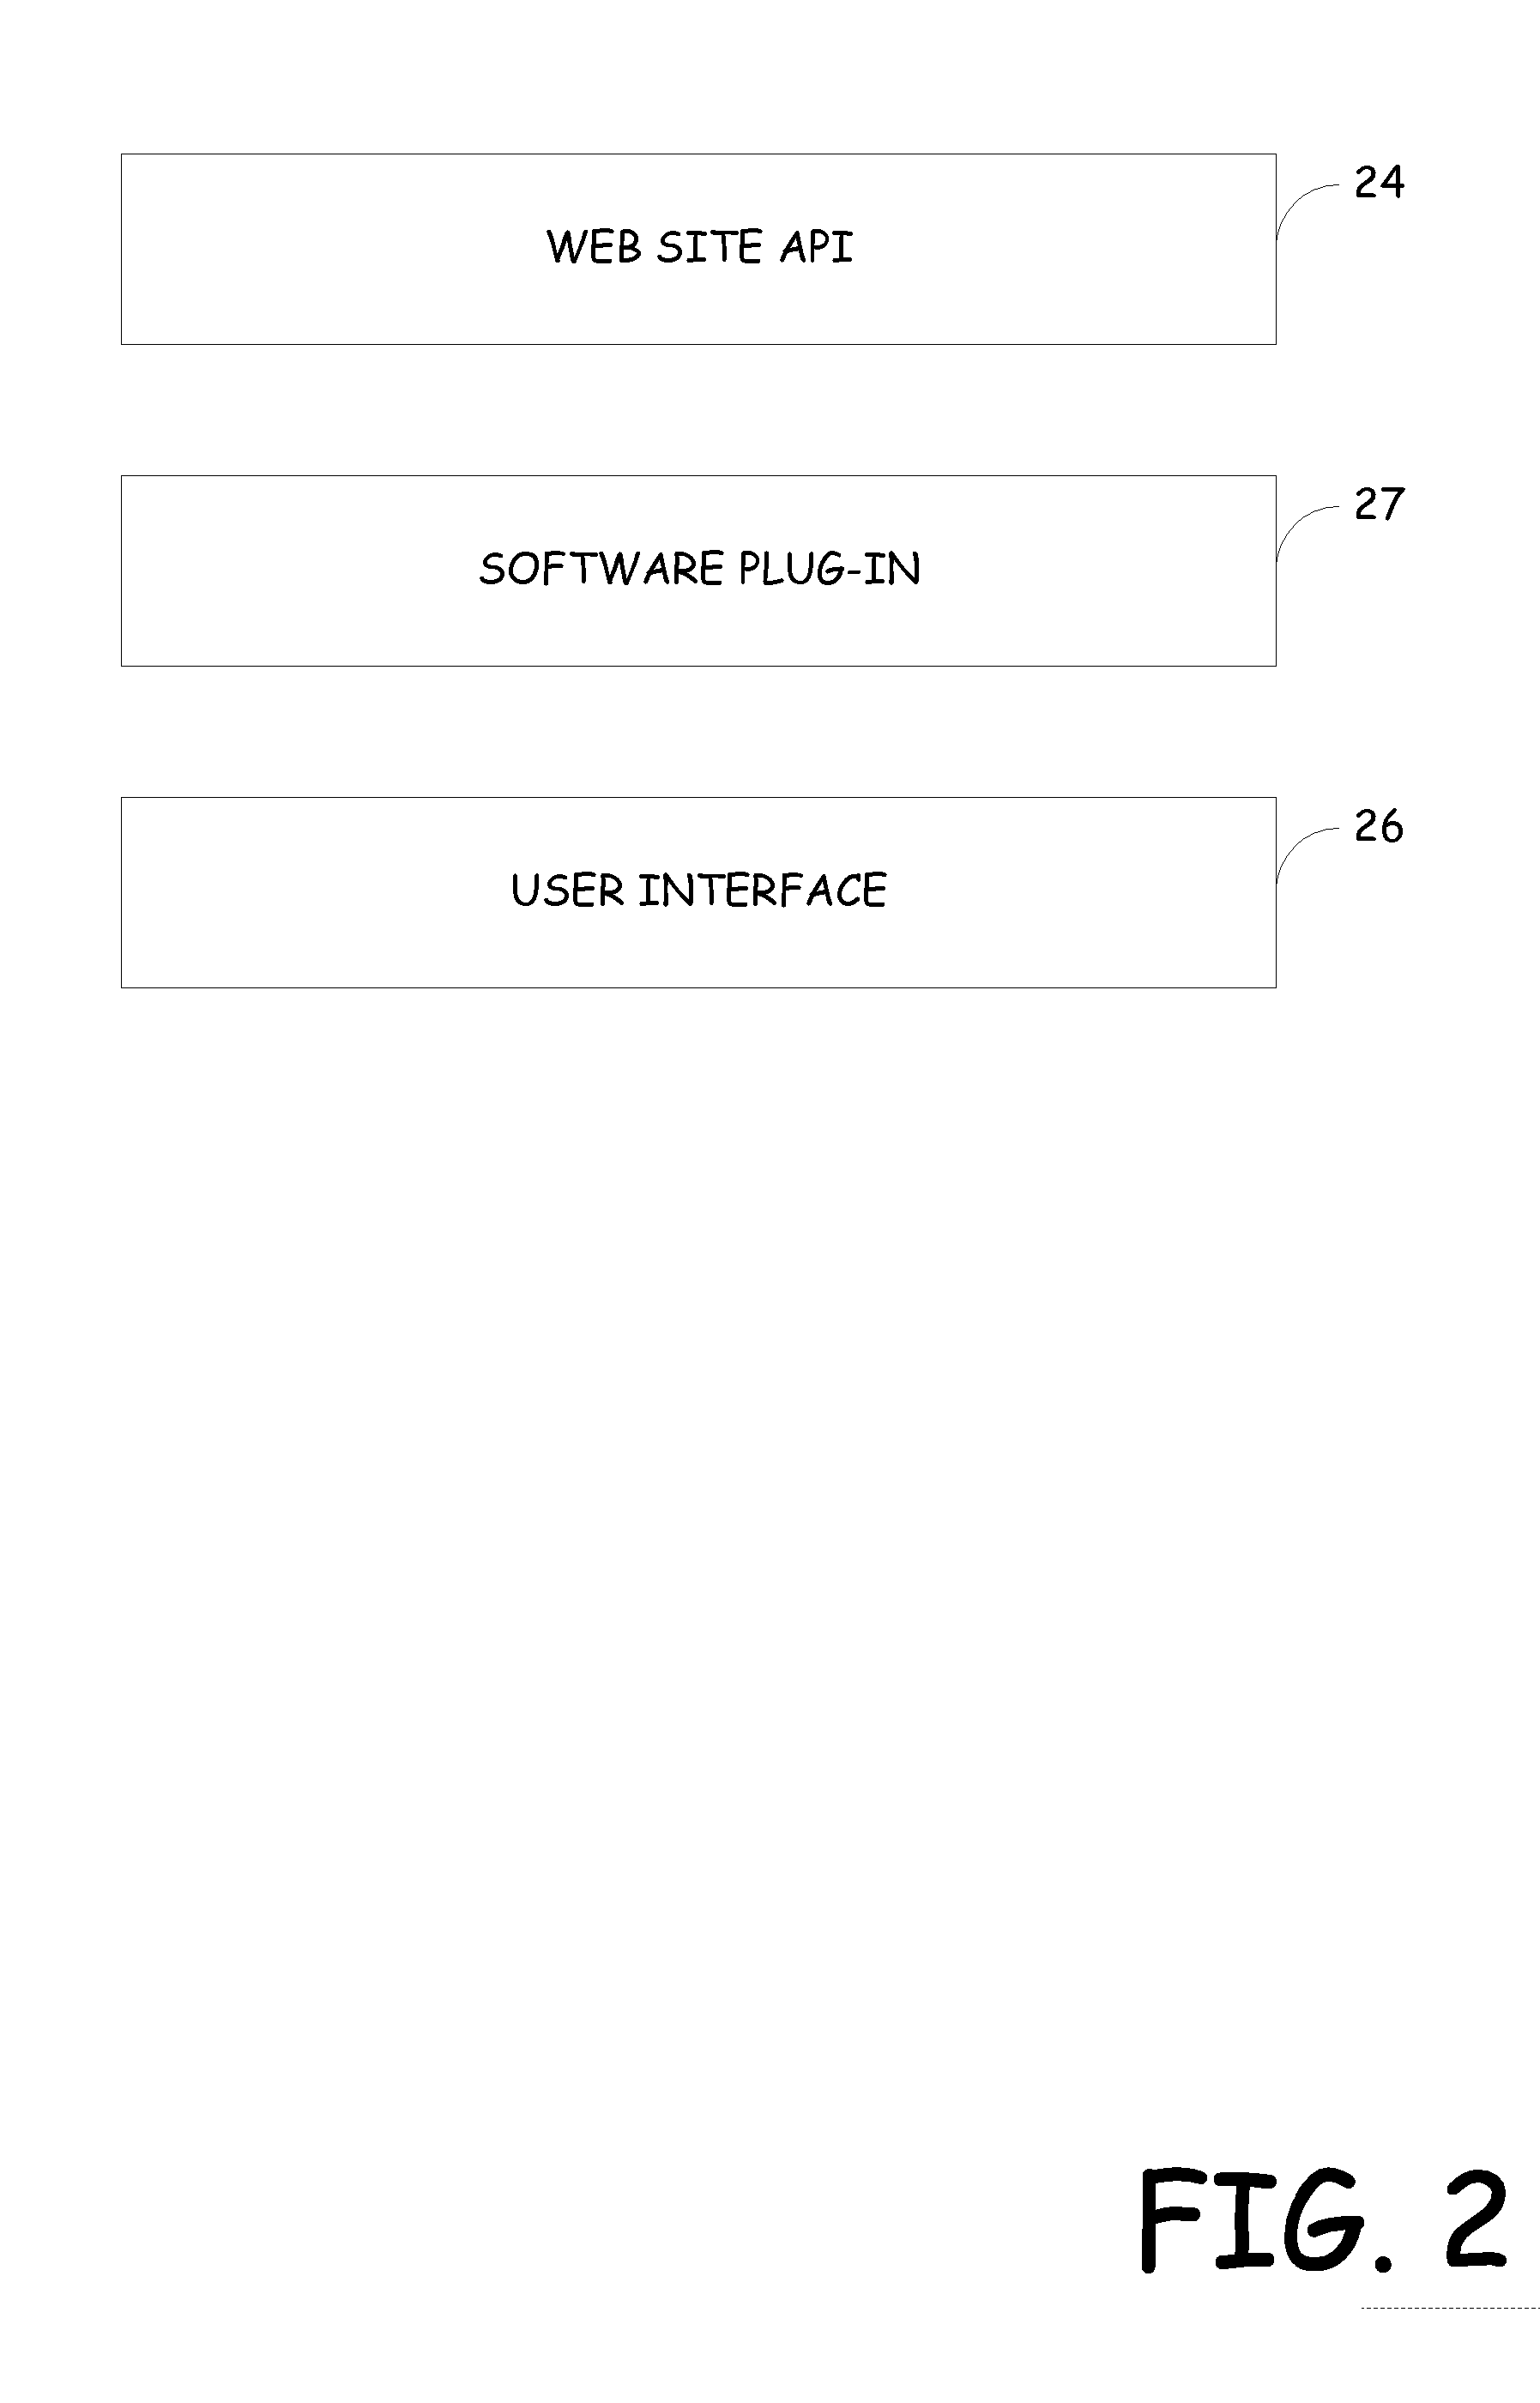 Systems and methods for saving internet content into a handheld internet appliance